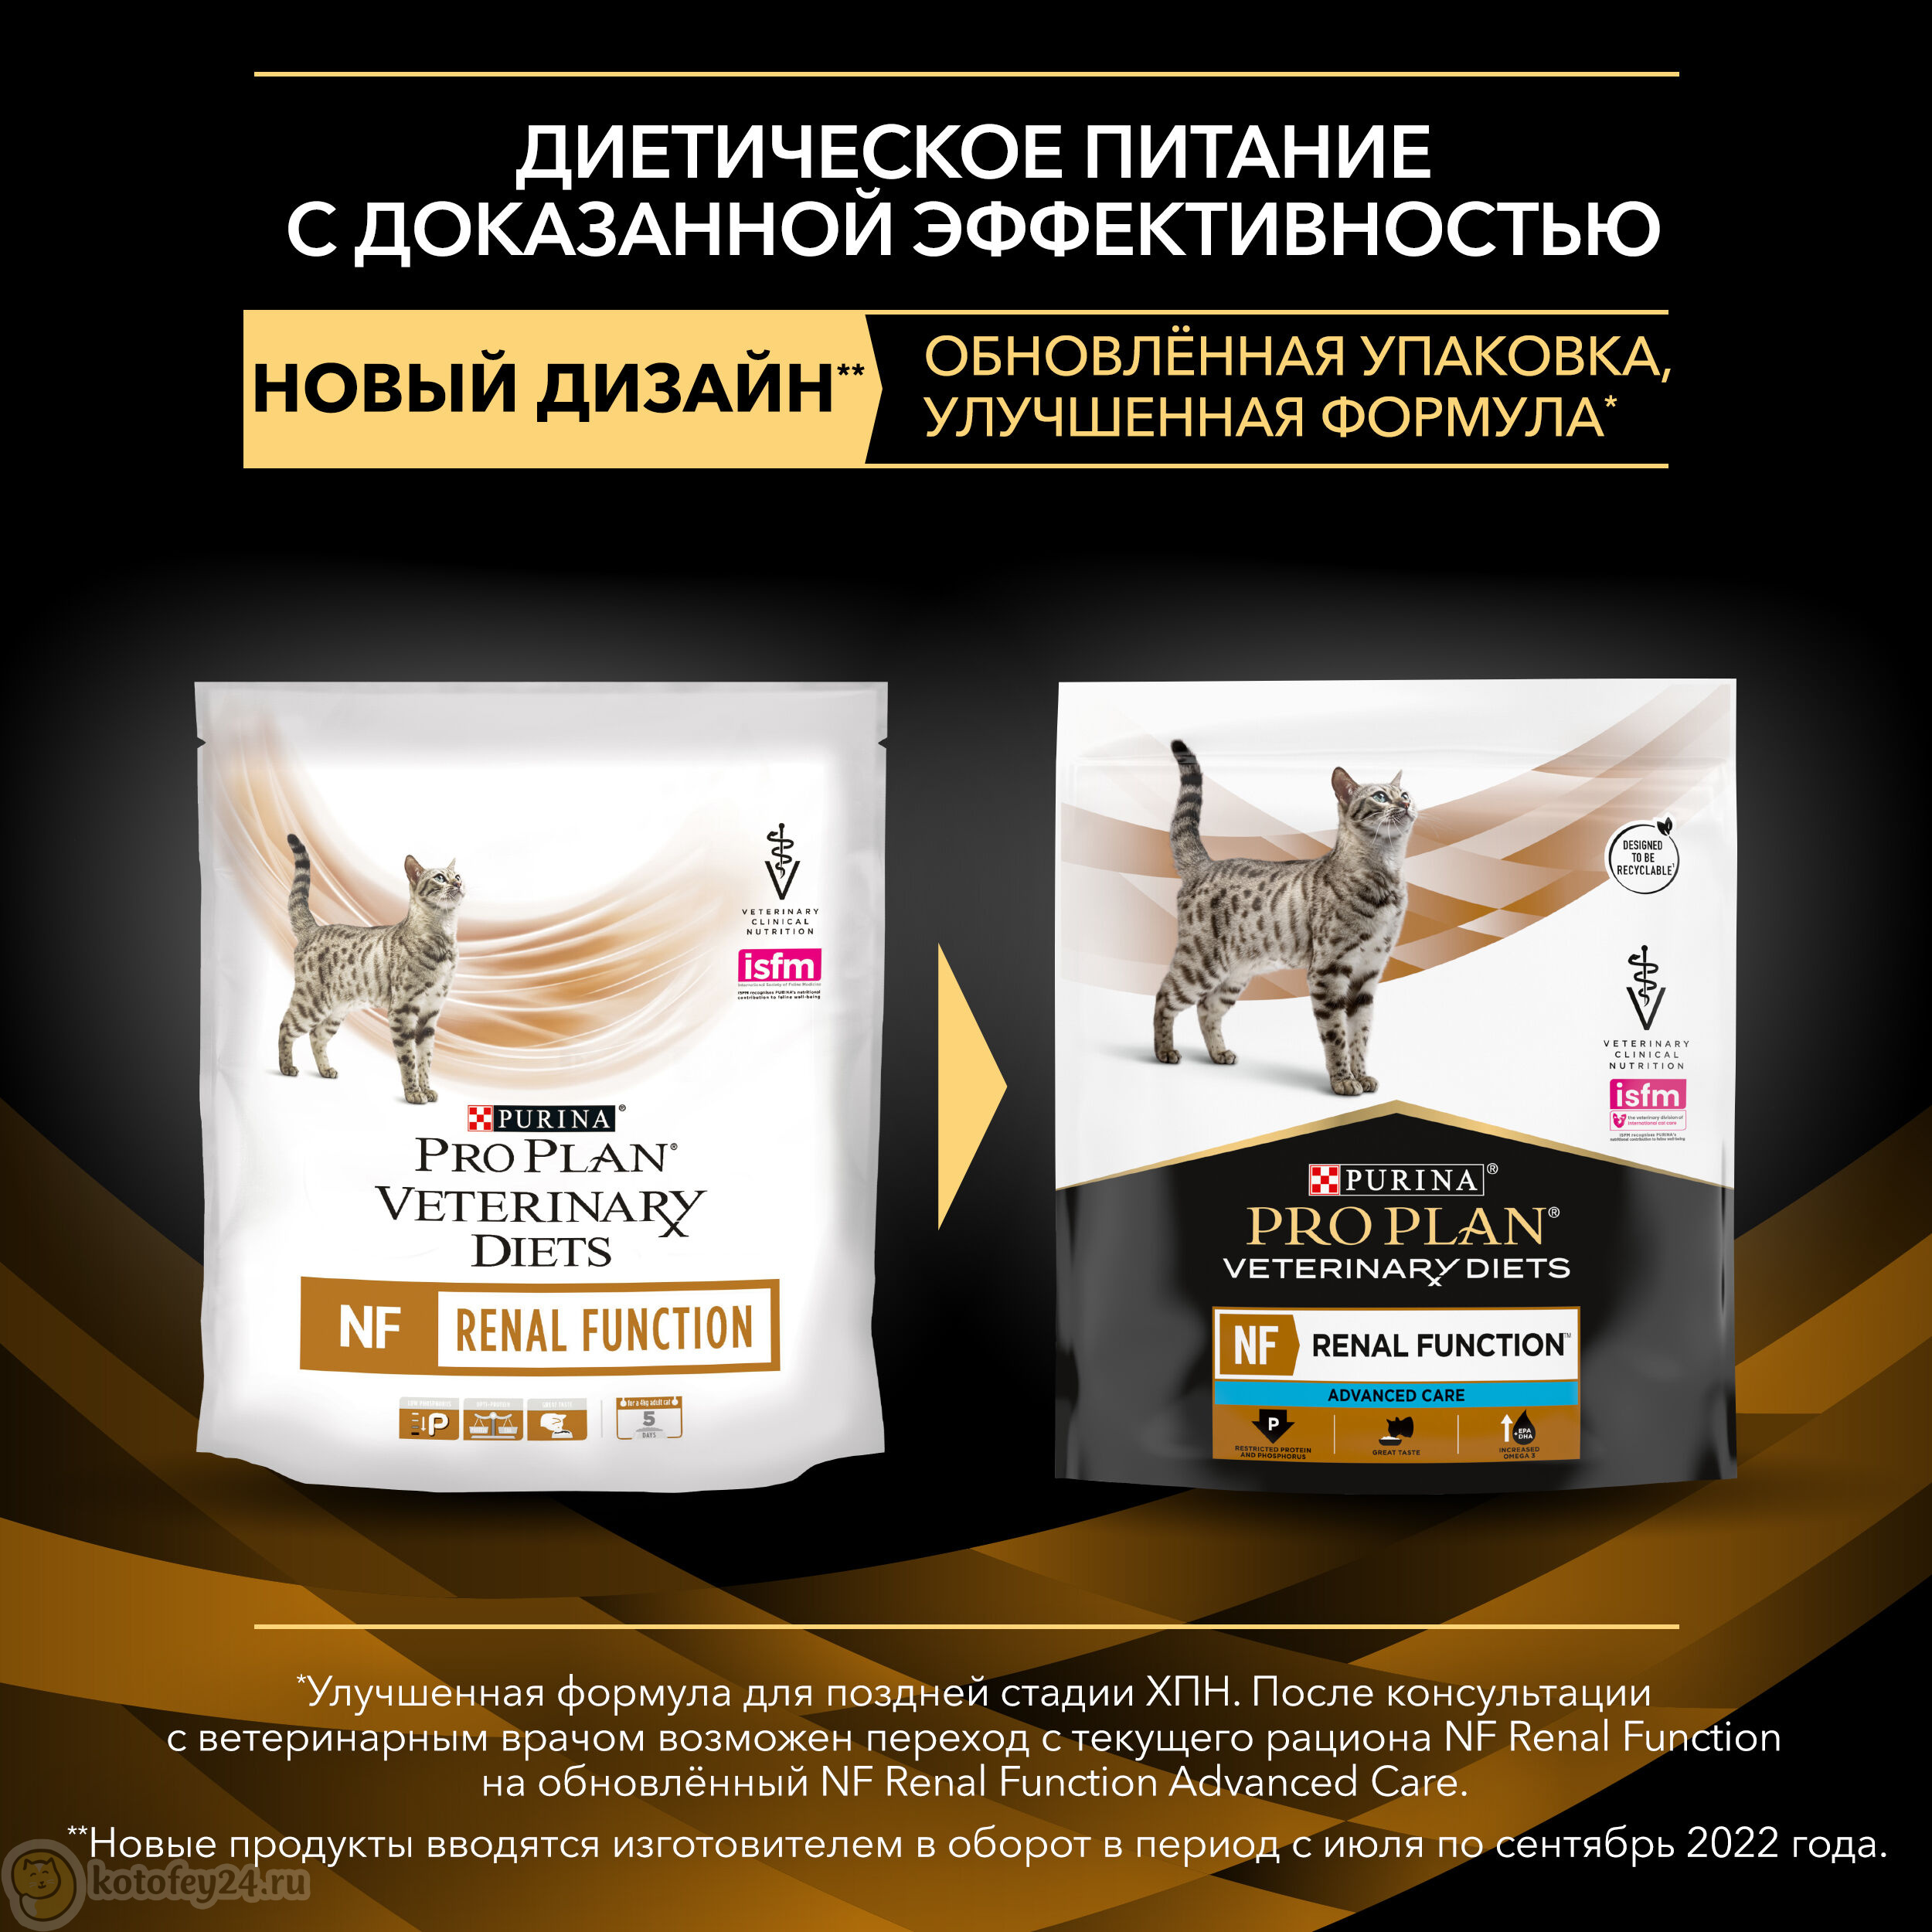 Pro plan nf renal function advanced care. Purina Pro Plan Veterinary Diets NF. Pro Plan Veterinary Diets NF renal function для собак. Pro Plan Veterinary renal Advanced Care. Pro Plan Veterinary Diets NF renal function (сухой).